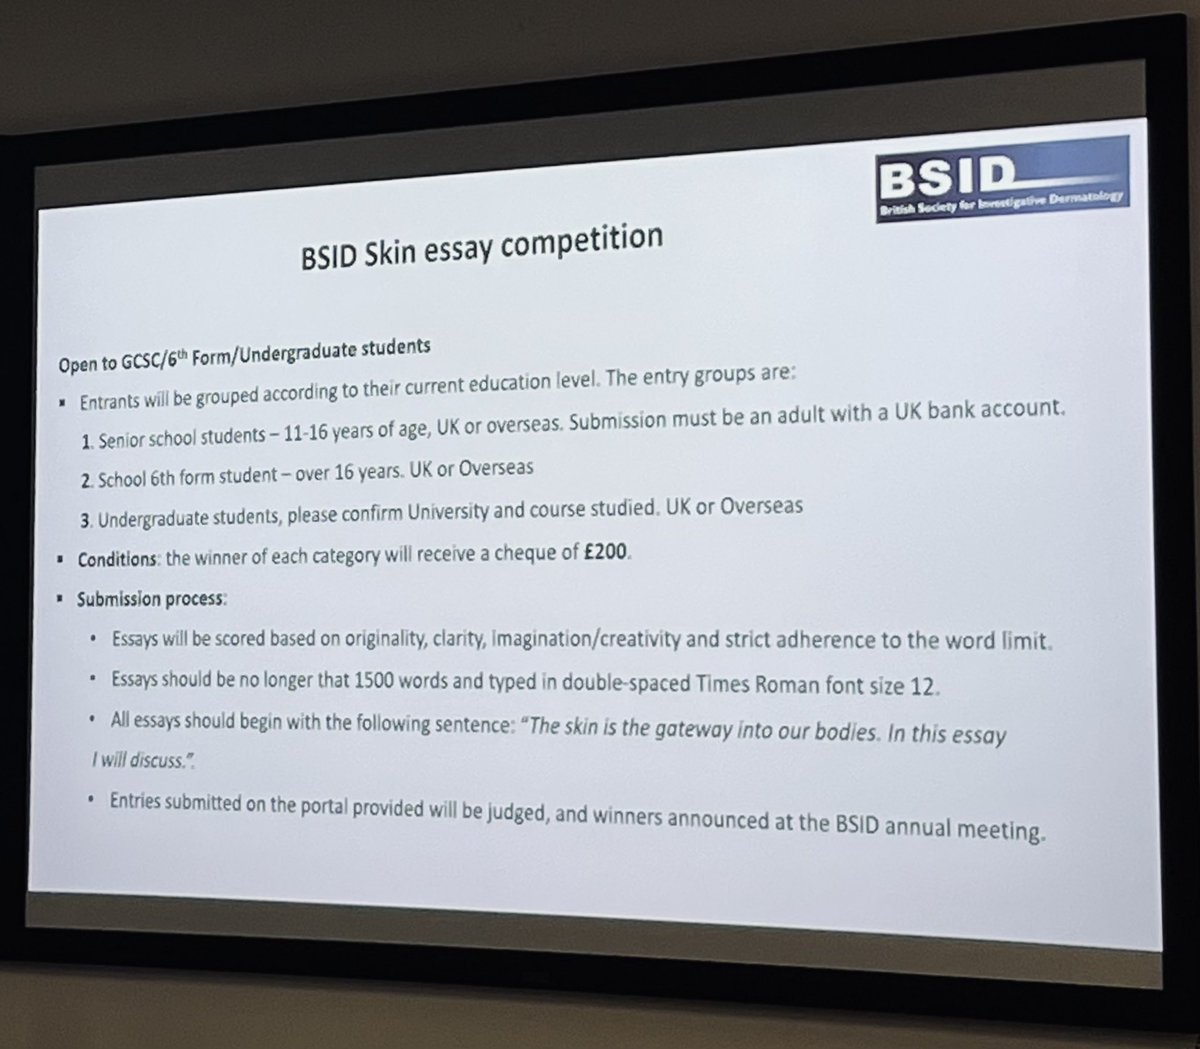 NEW science engagement initiatives from the #BSID including this 1500 word essay competition open to all GCSE/6th form/UG students. “The skin is the gateway into our bodies. In this essay I will discuss…” ✍️ £200 prize 🏆 
#BSID2022 #BroadenTheirHorizons #Derm #Research